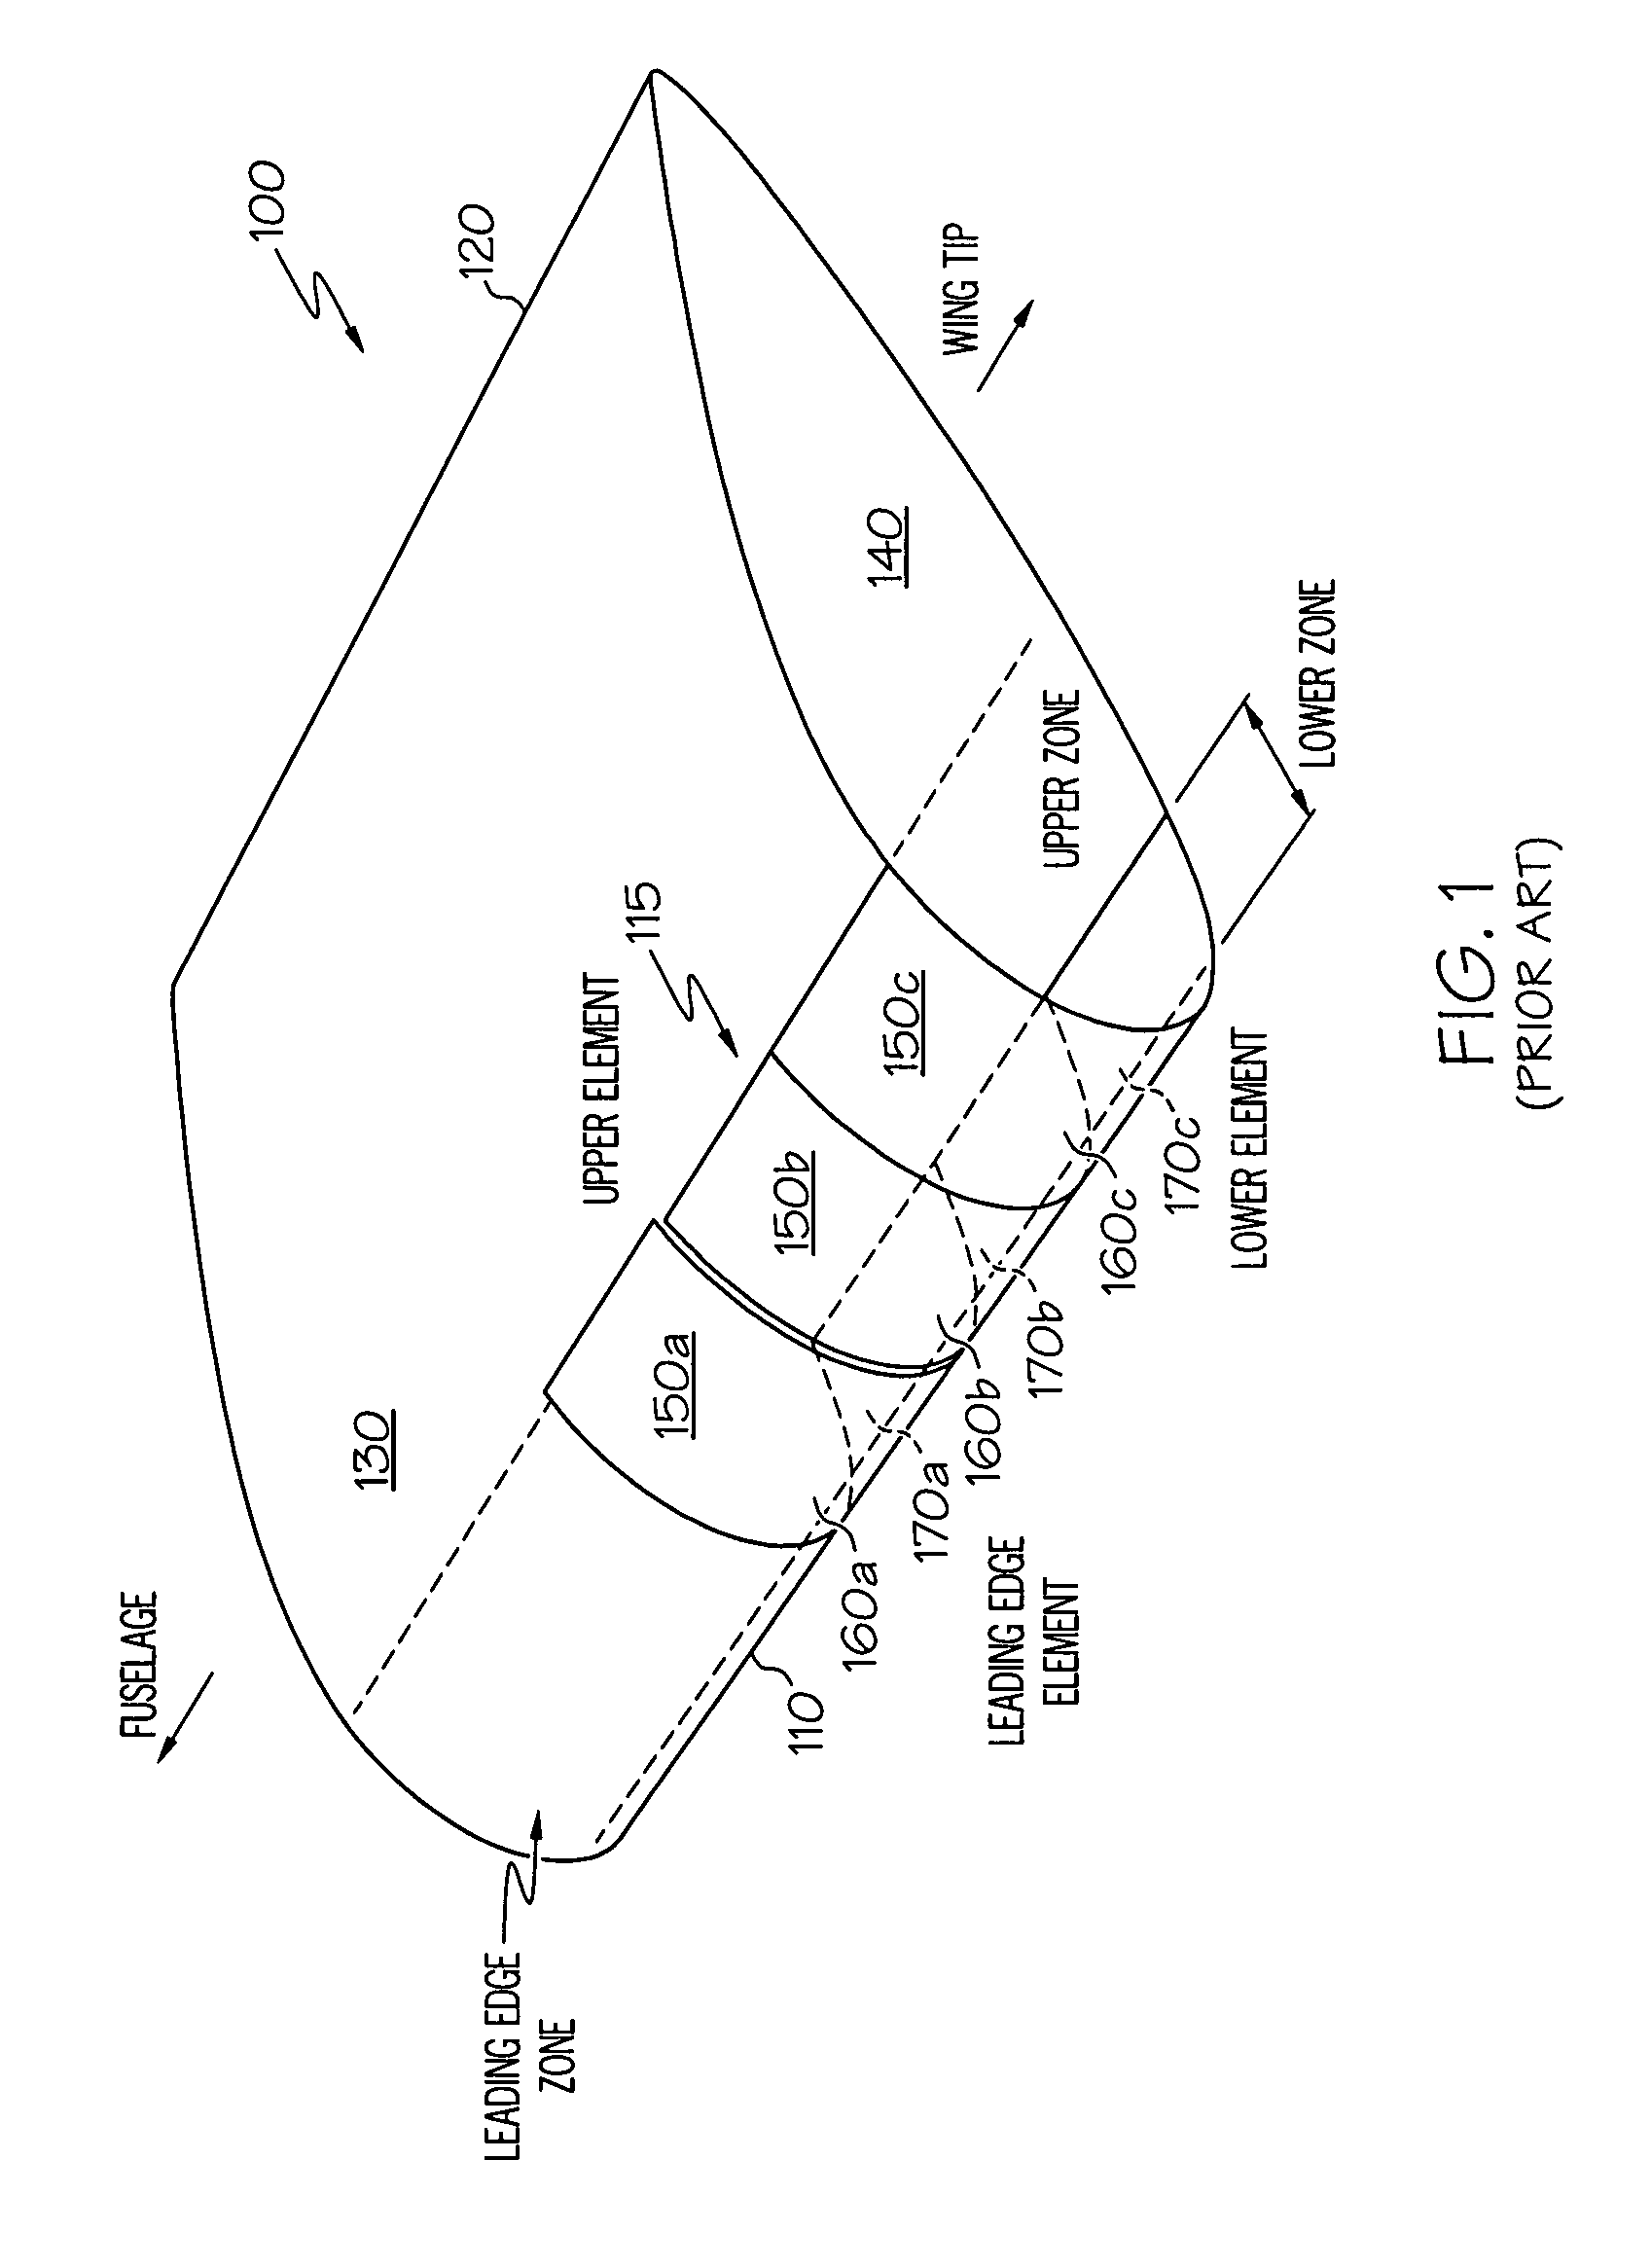 Wing ice protection heater element network